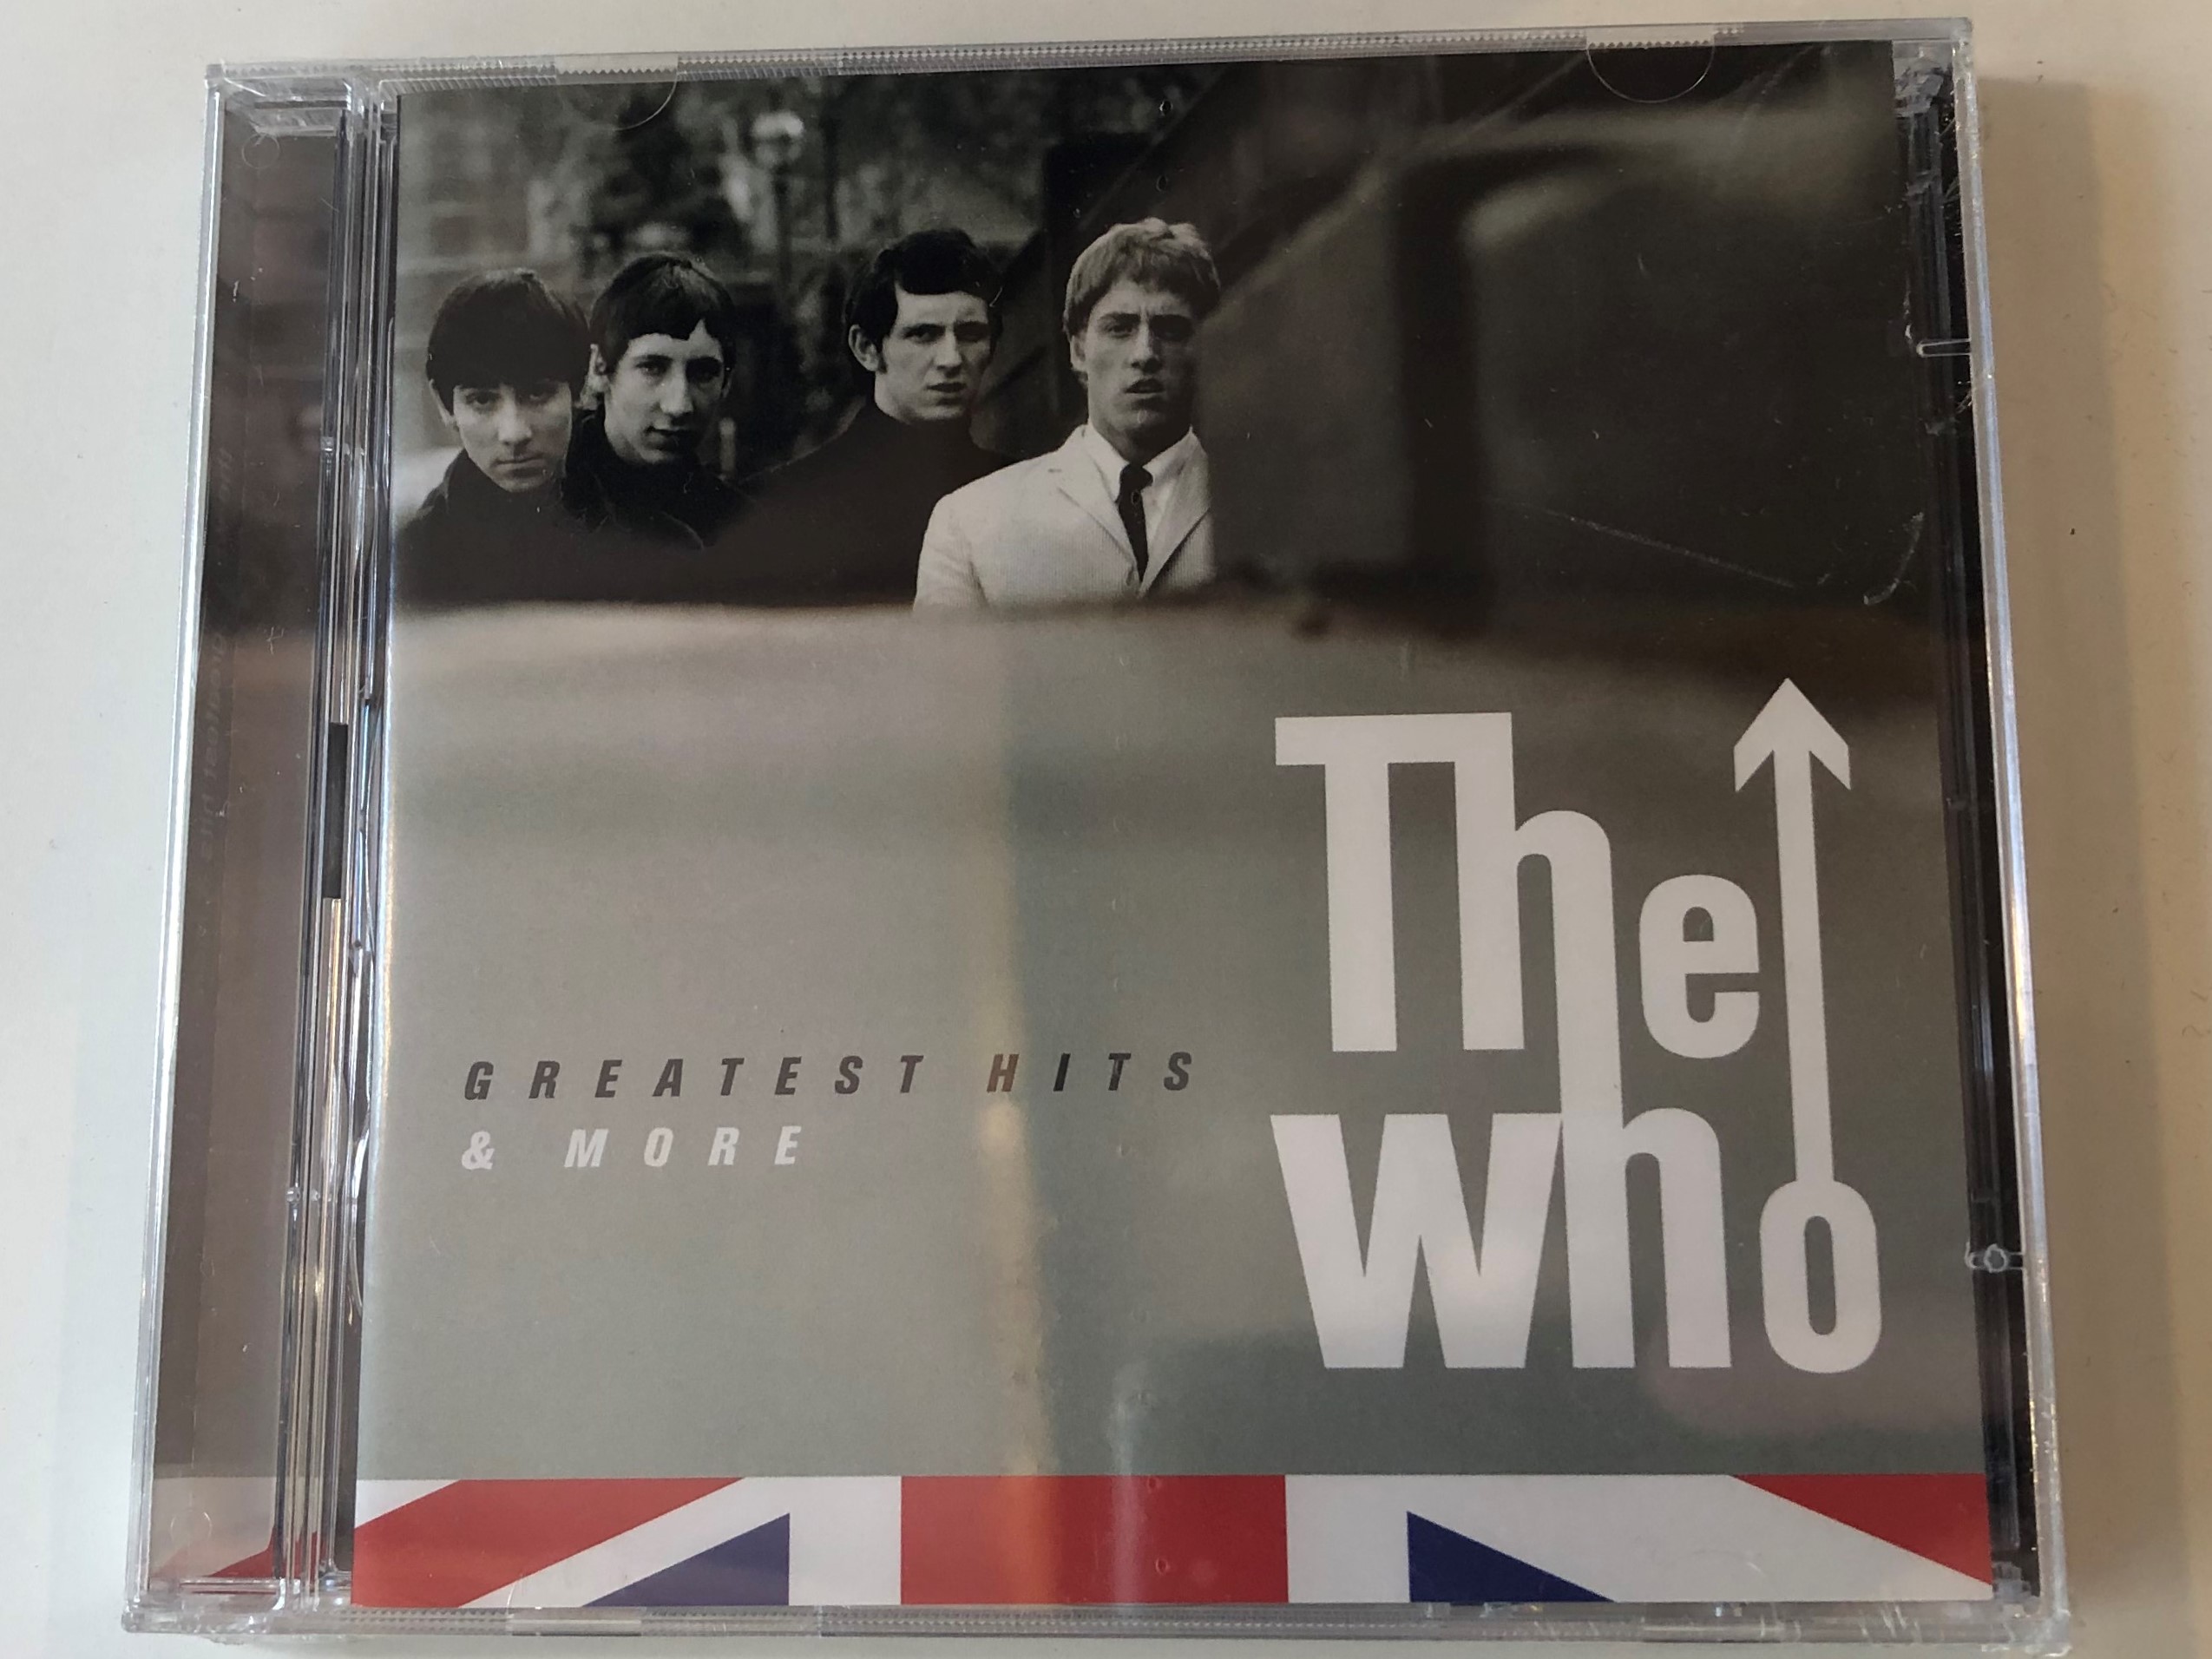 the-who-greatest-hits-more-polydor-2x-audio-cd-2010-0600753252024-1-.jpg